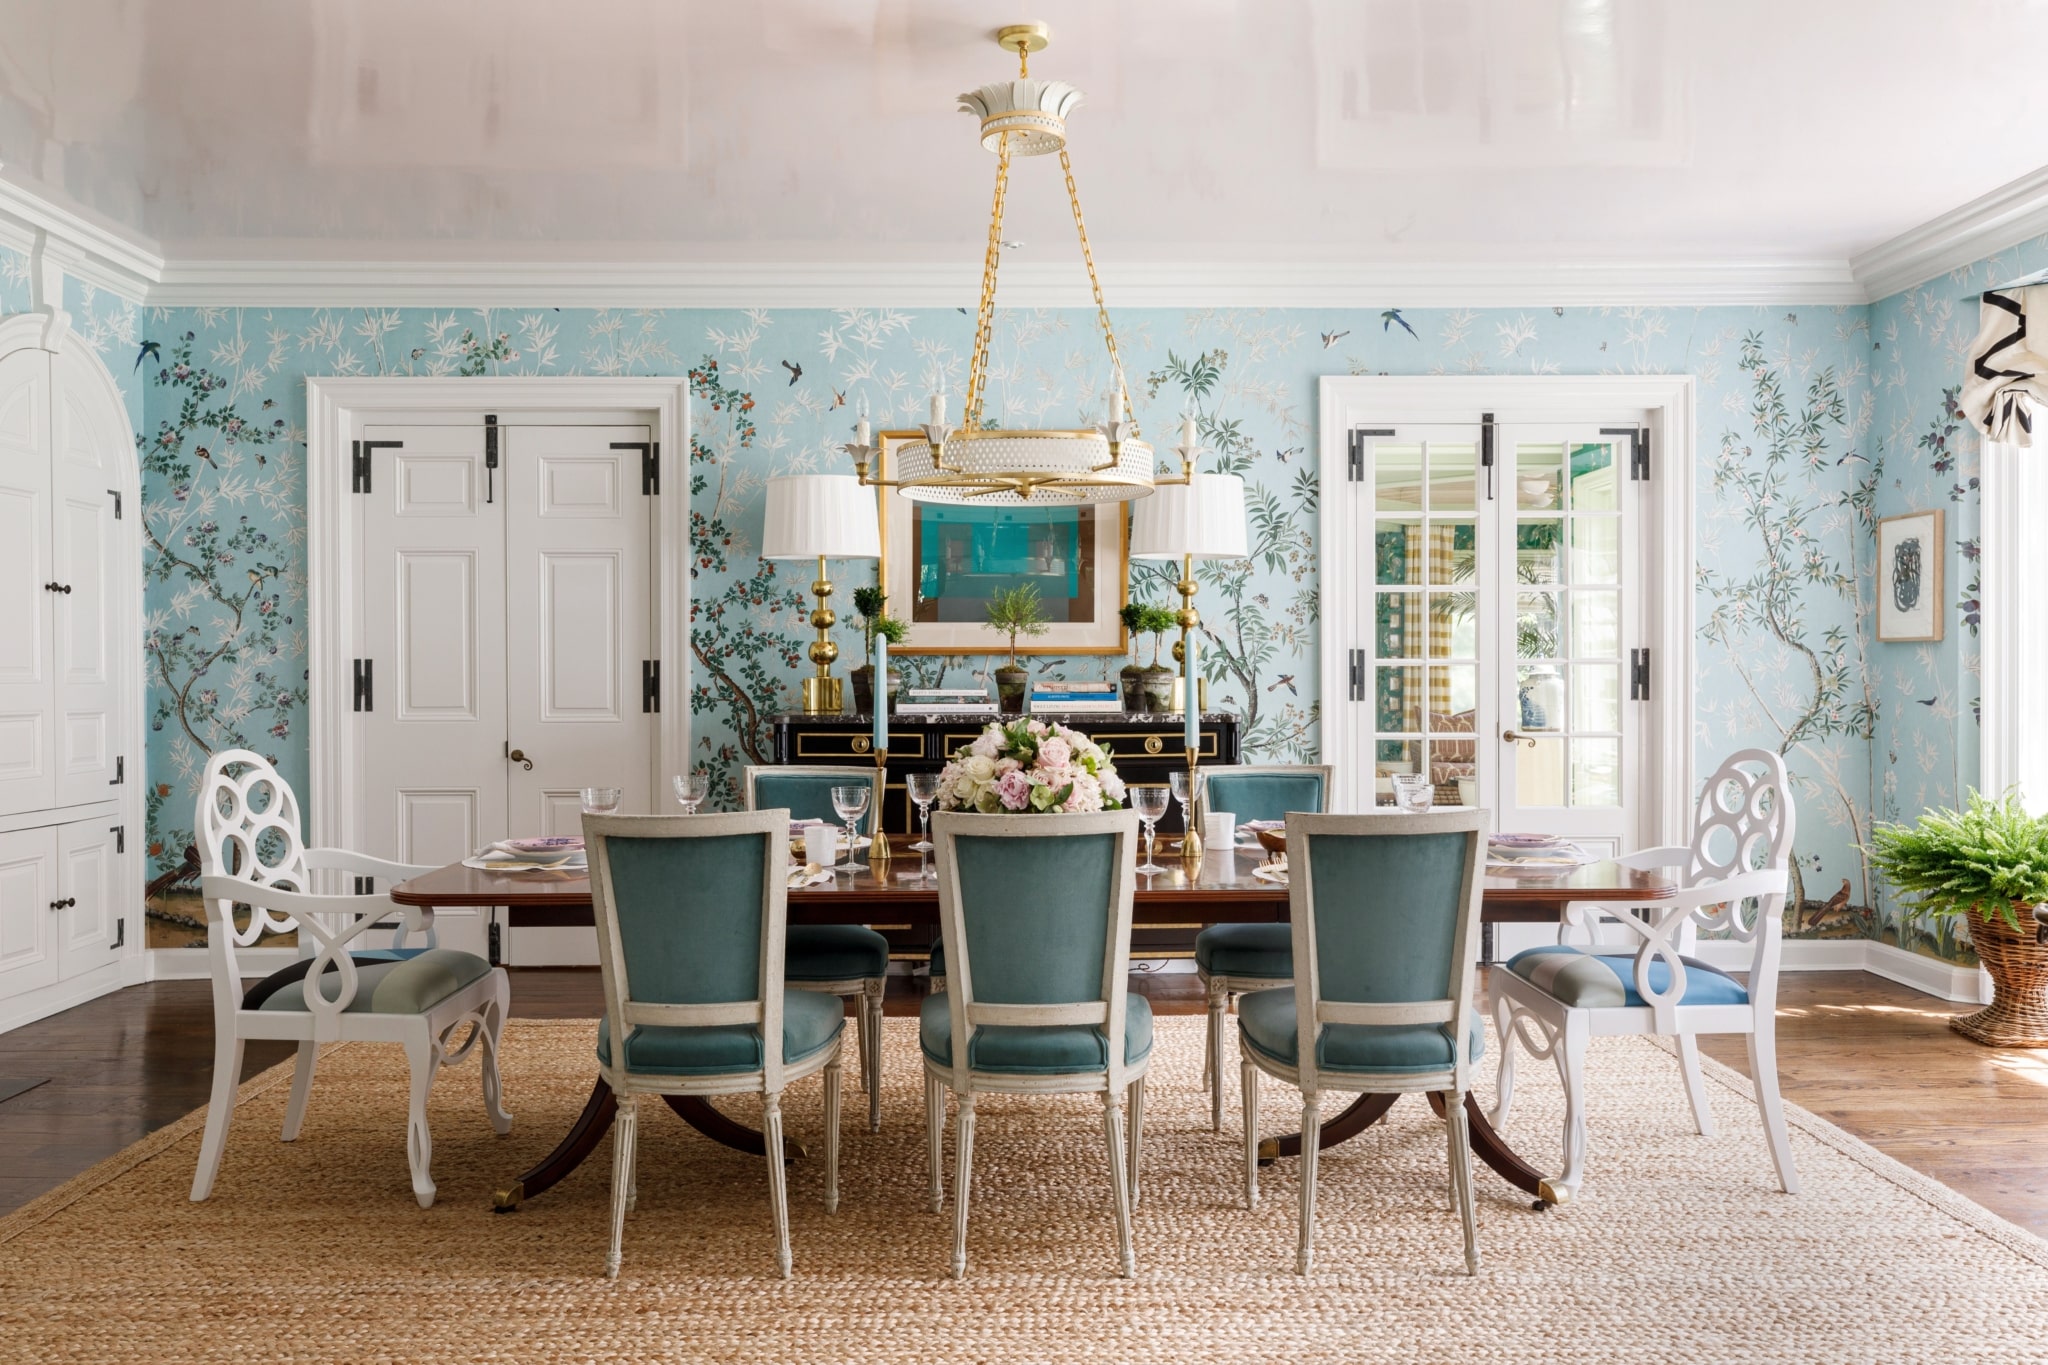 Paloma Contreras, celebrated interior designer and tastemaker, has once again captivated design enthusiasts with her latest book, The New Classic Home: Where Timeless Style Meets Modern Design. Aimée Mazzenga Photography - oval dining room table with chairs - deGournay wallpaper